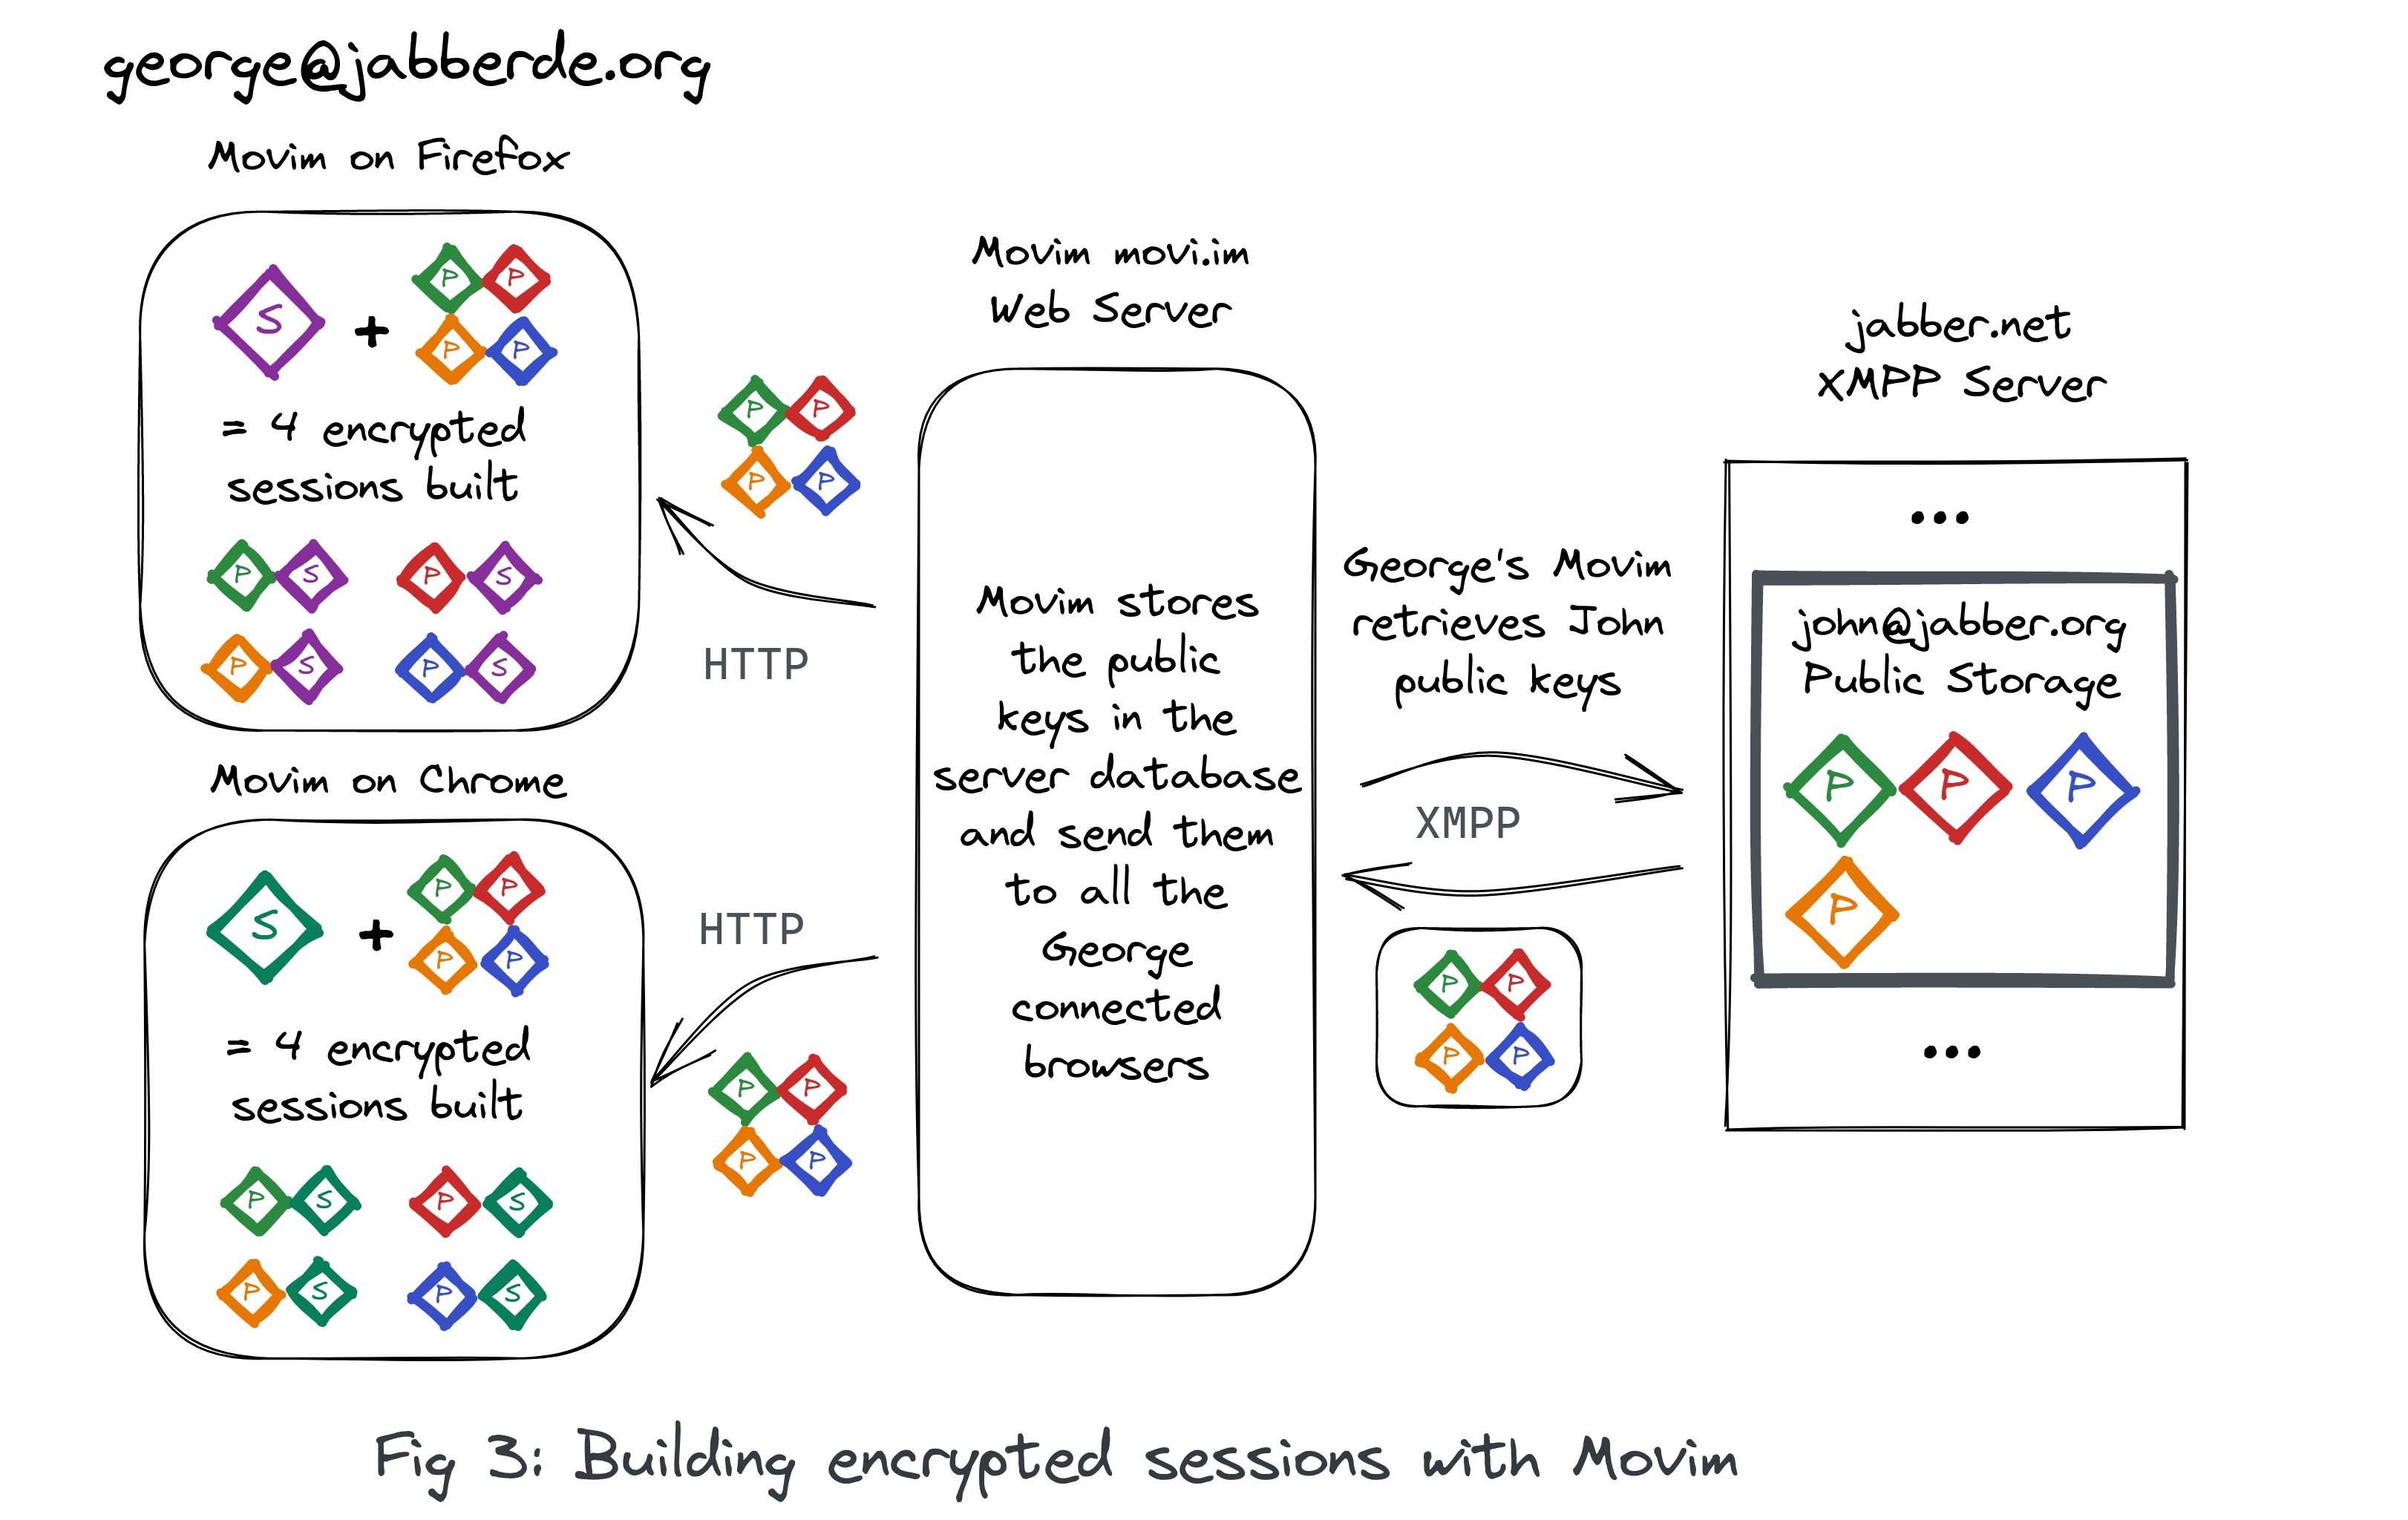 Building encrypted sessions with Movim